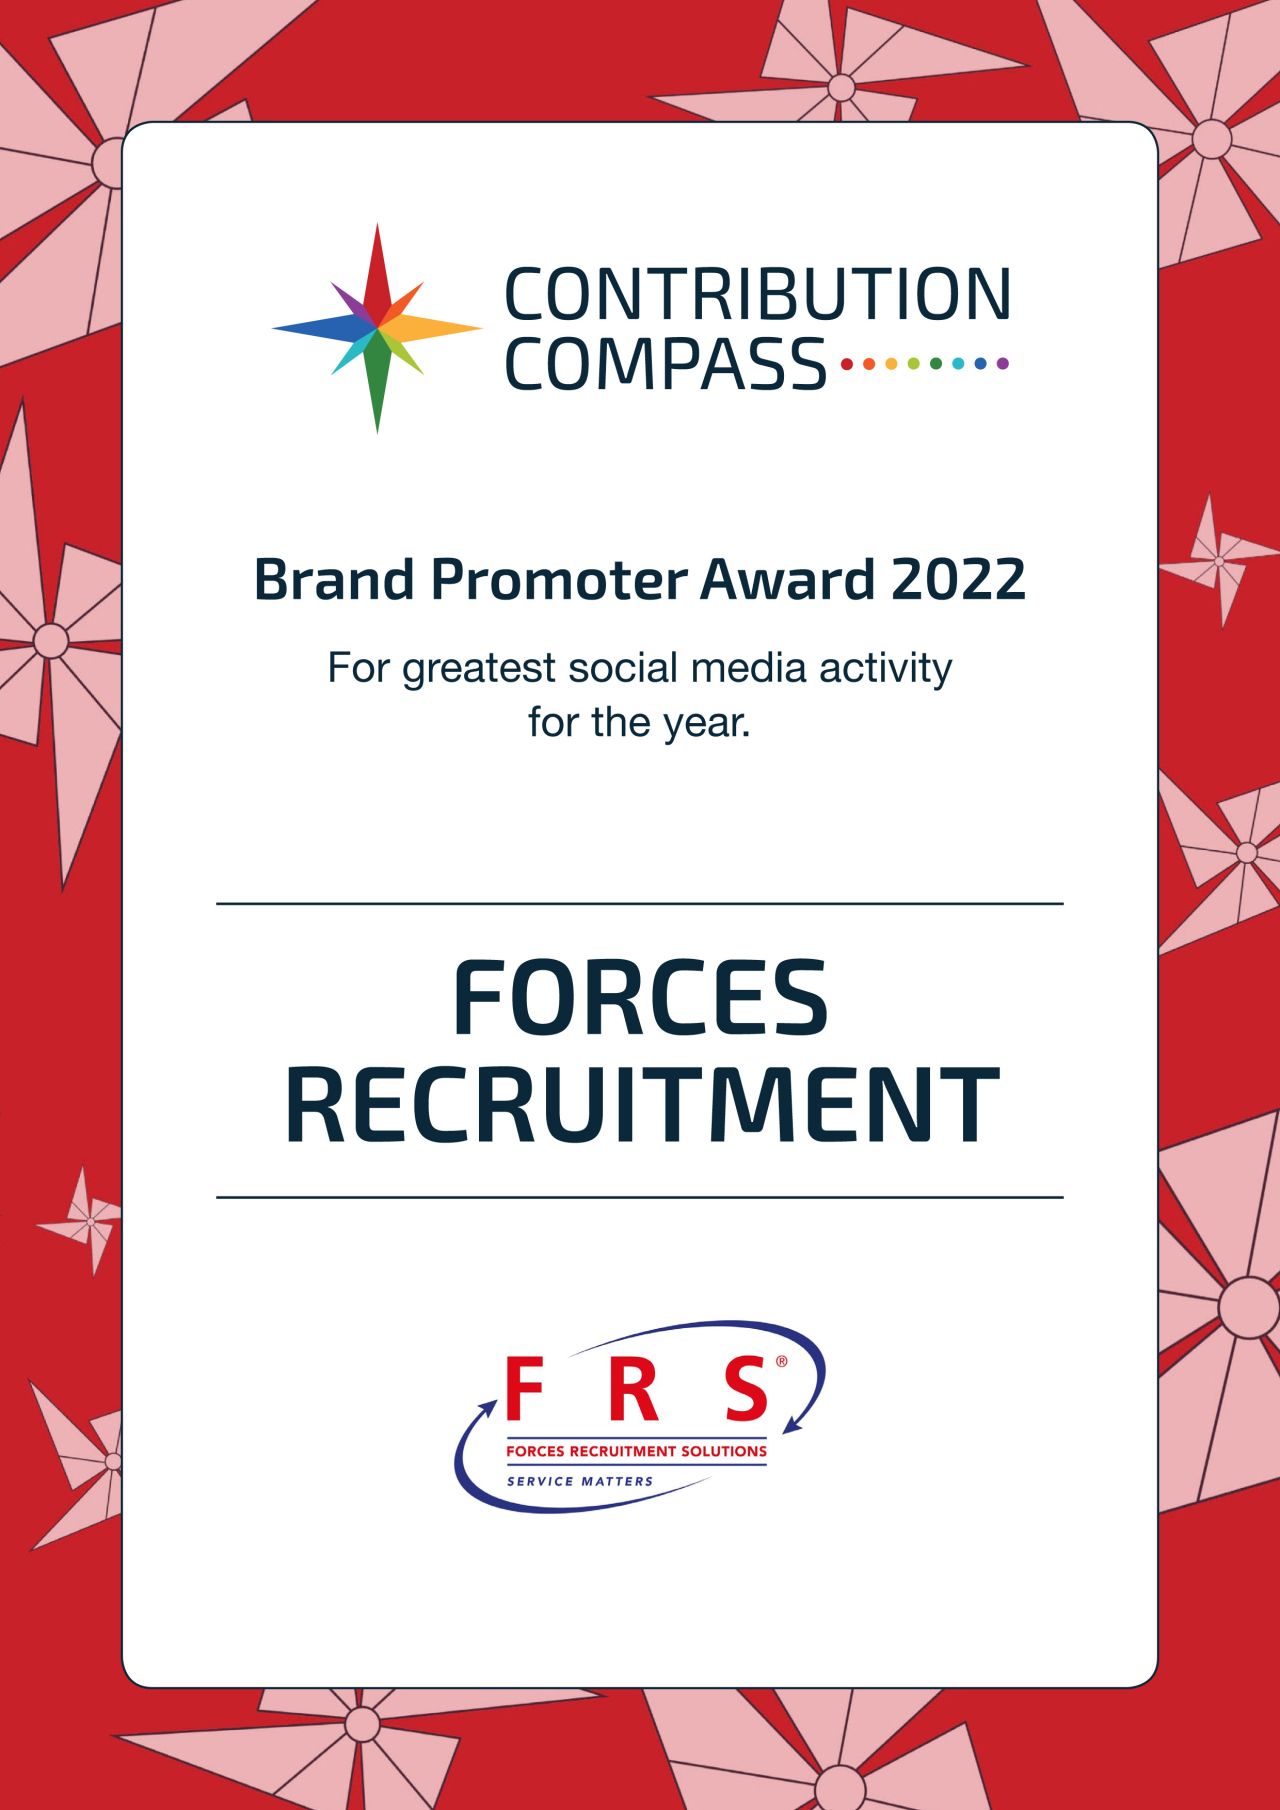 Image for FORCES RECRUITMENT WINS BRAND PROMOTER AWARD FOR THIRD YEAR RUNNING